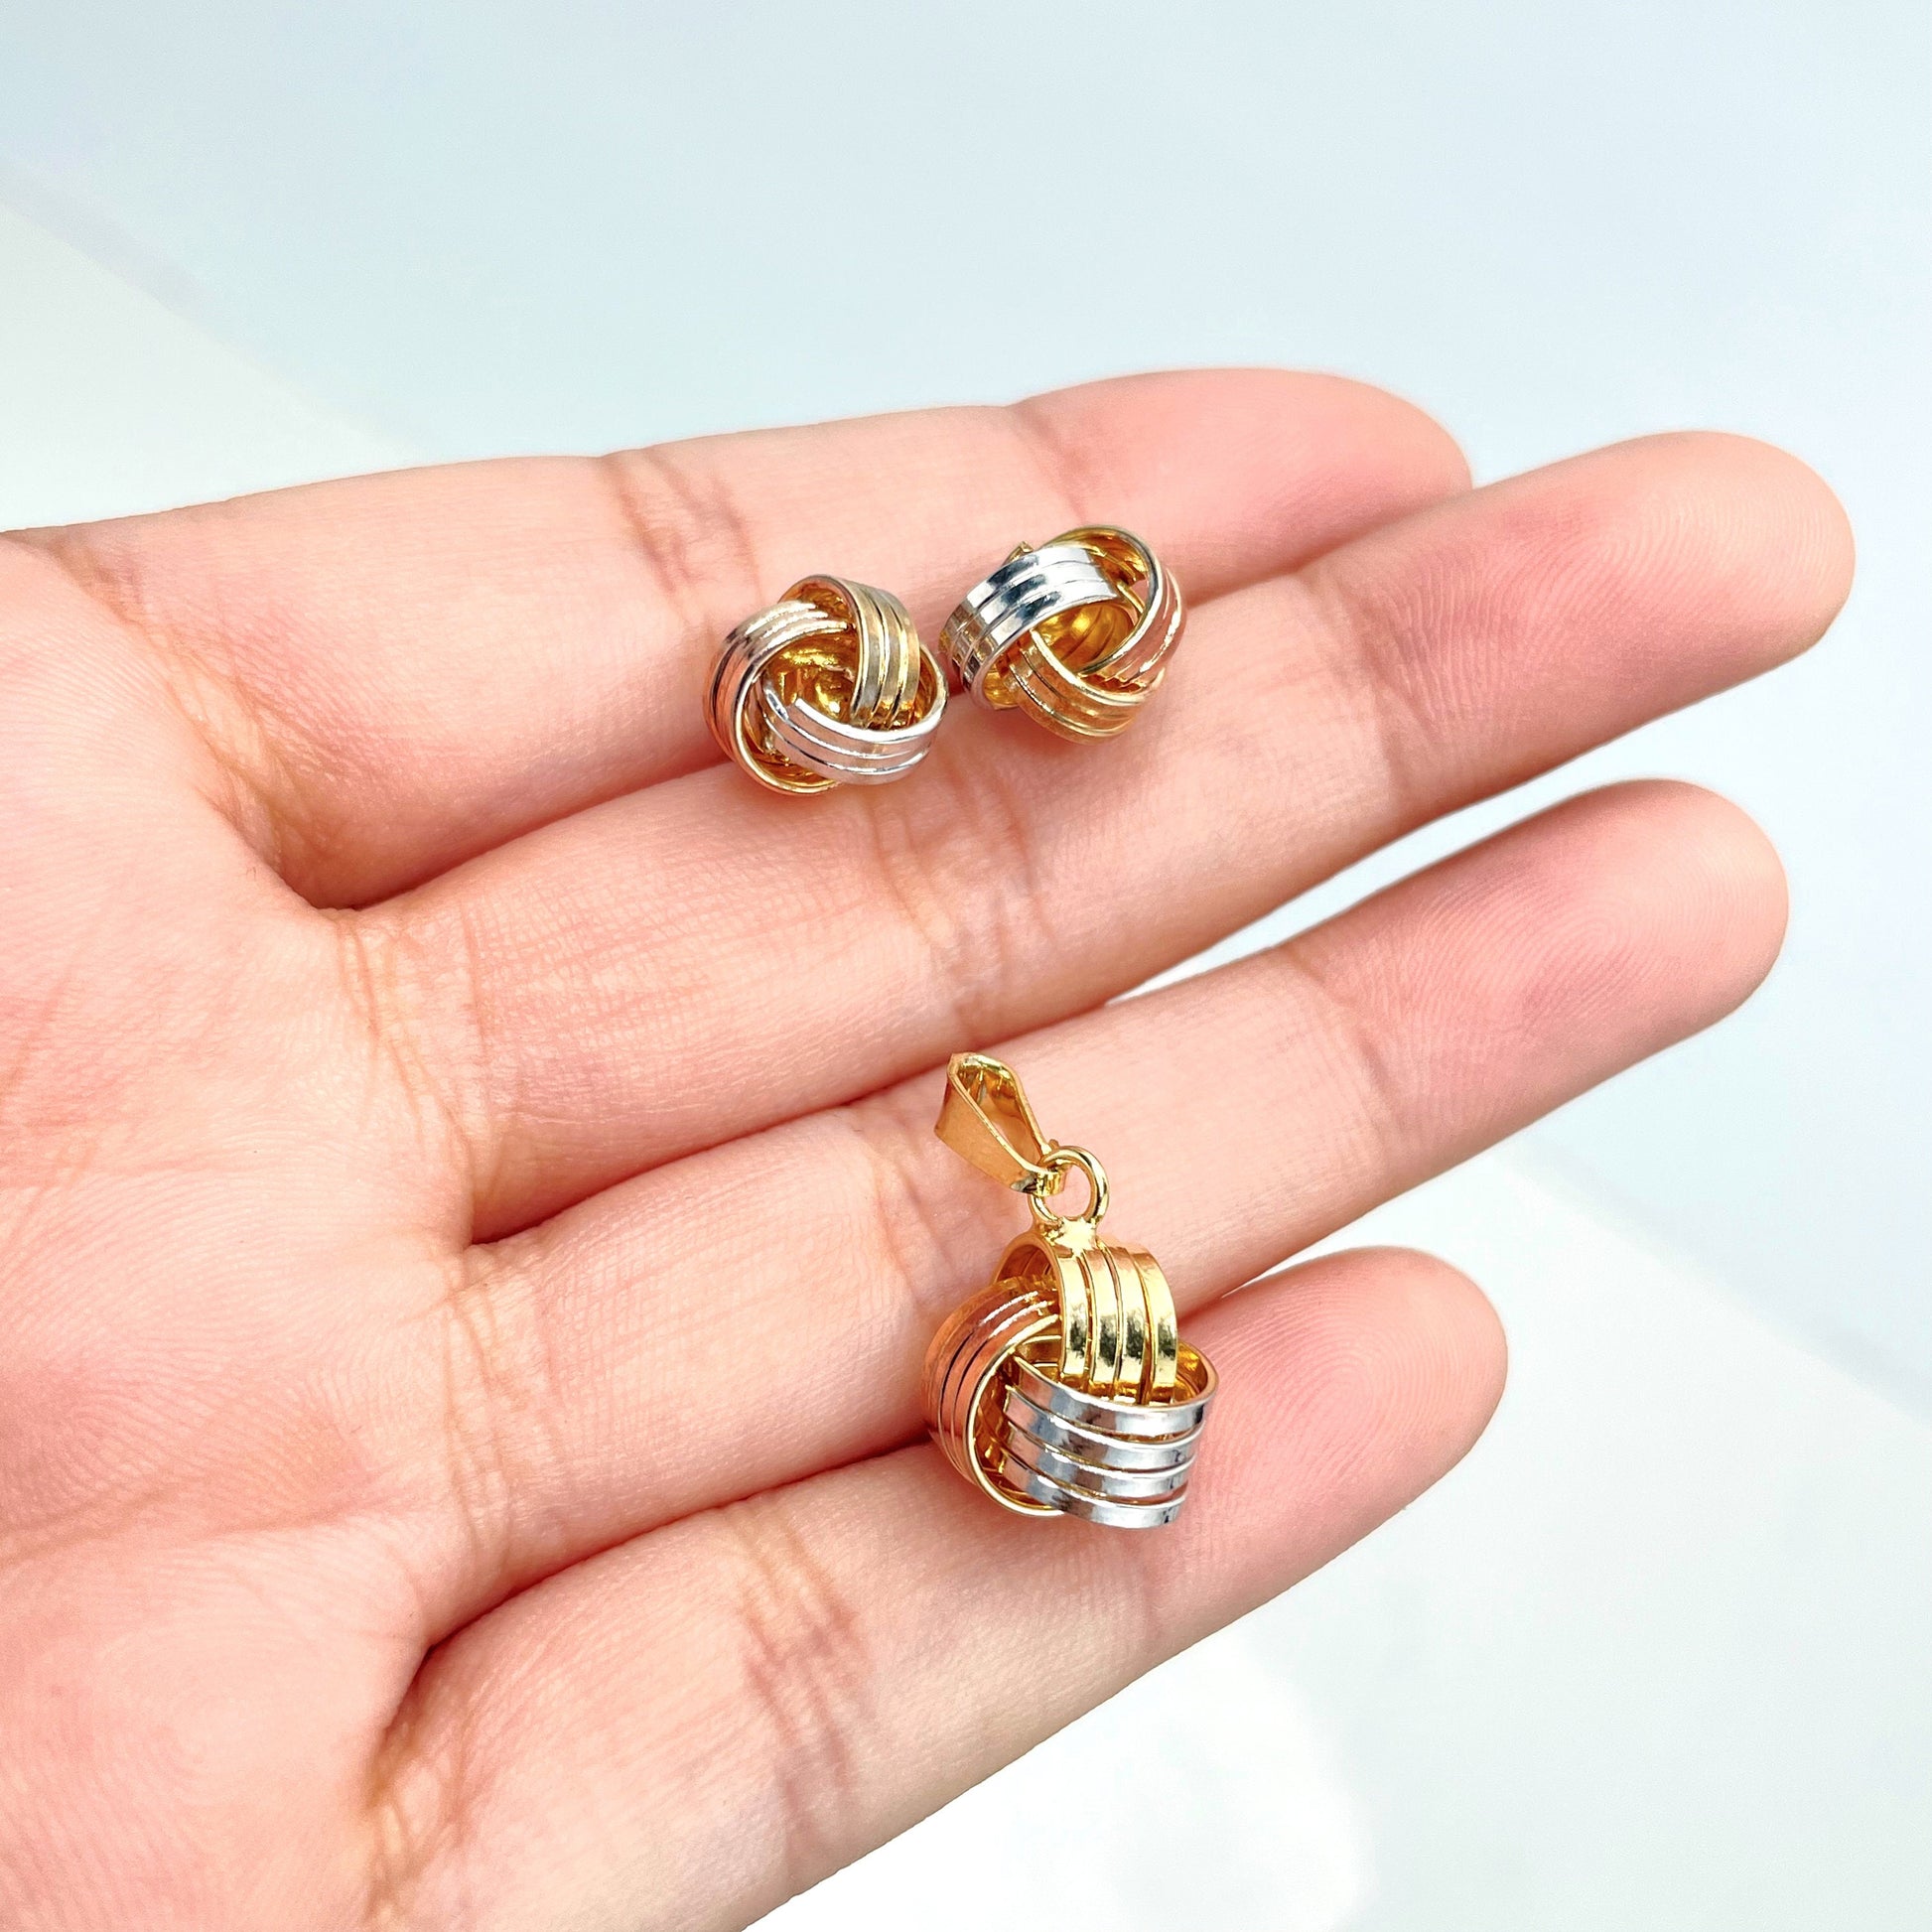 18k Gold Filled Three Tone, Tri-Color Knot Stud Earrings & Charms Set, Wholesale Jewelry Making Supplies